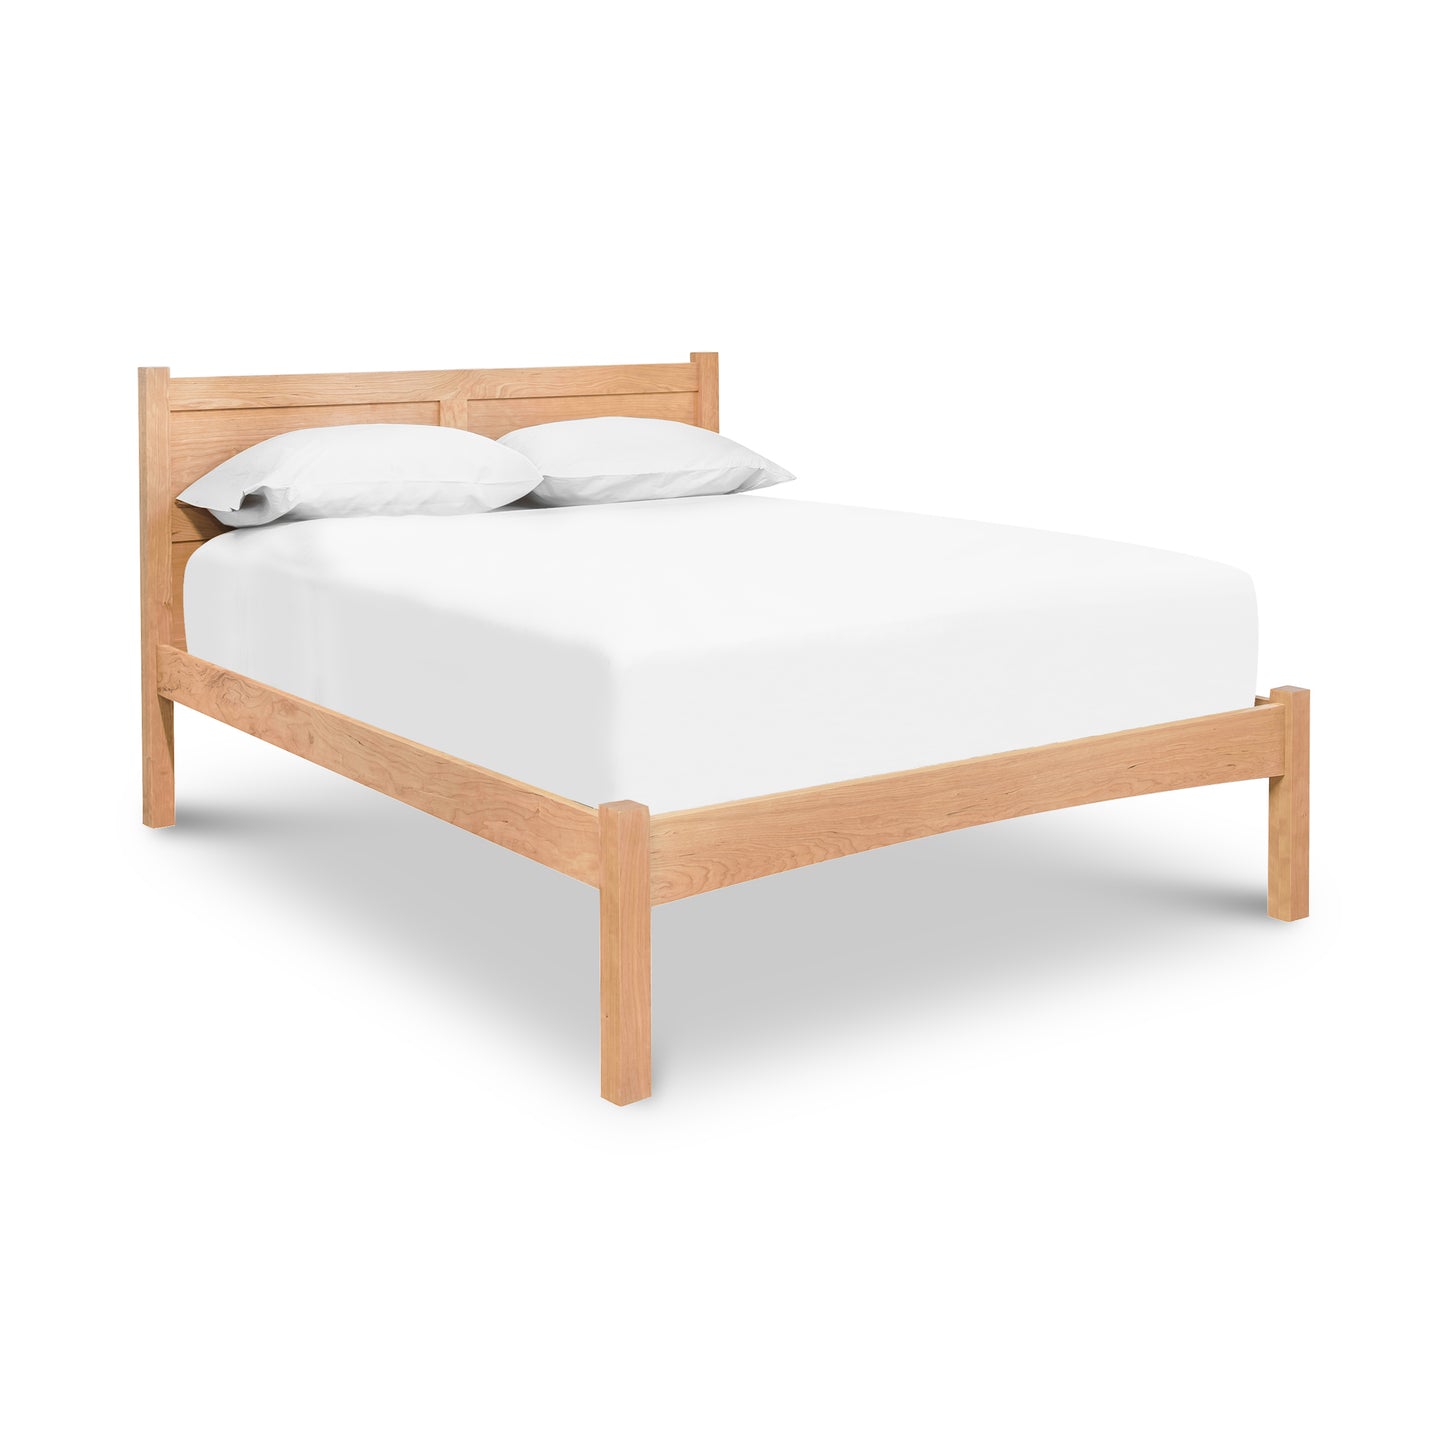 A Essex Low Footboard Bed, crafted from solid hardwoods by Vermont Furniture Designs, with a white mattress and pillows against a white background.